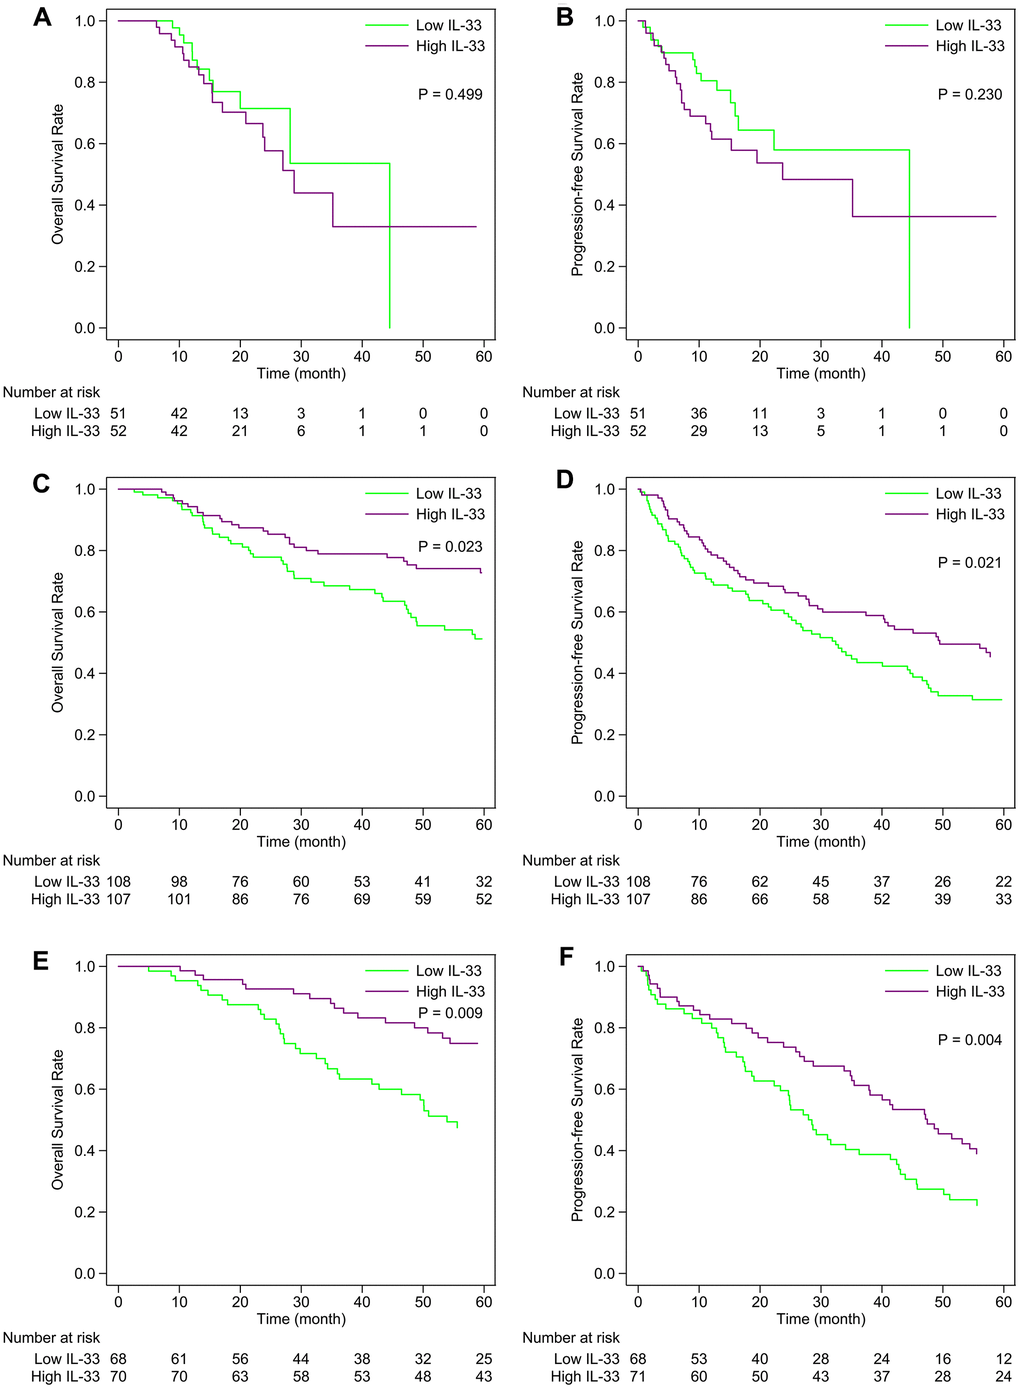 Kaplan-Meier curves of the high and low IL-33 groups within each sub-cohort. (A, B) primary melanoma sub-cohort; (C, D) lymph node metastasis sub-cohort; (E, F) other metastasis sub-cohort. P-values were calculated by the log-rank test.